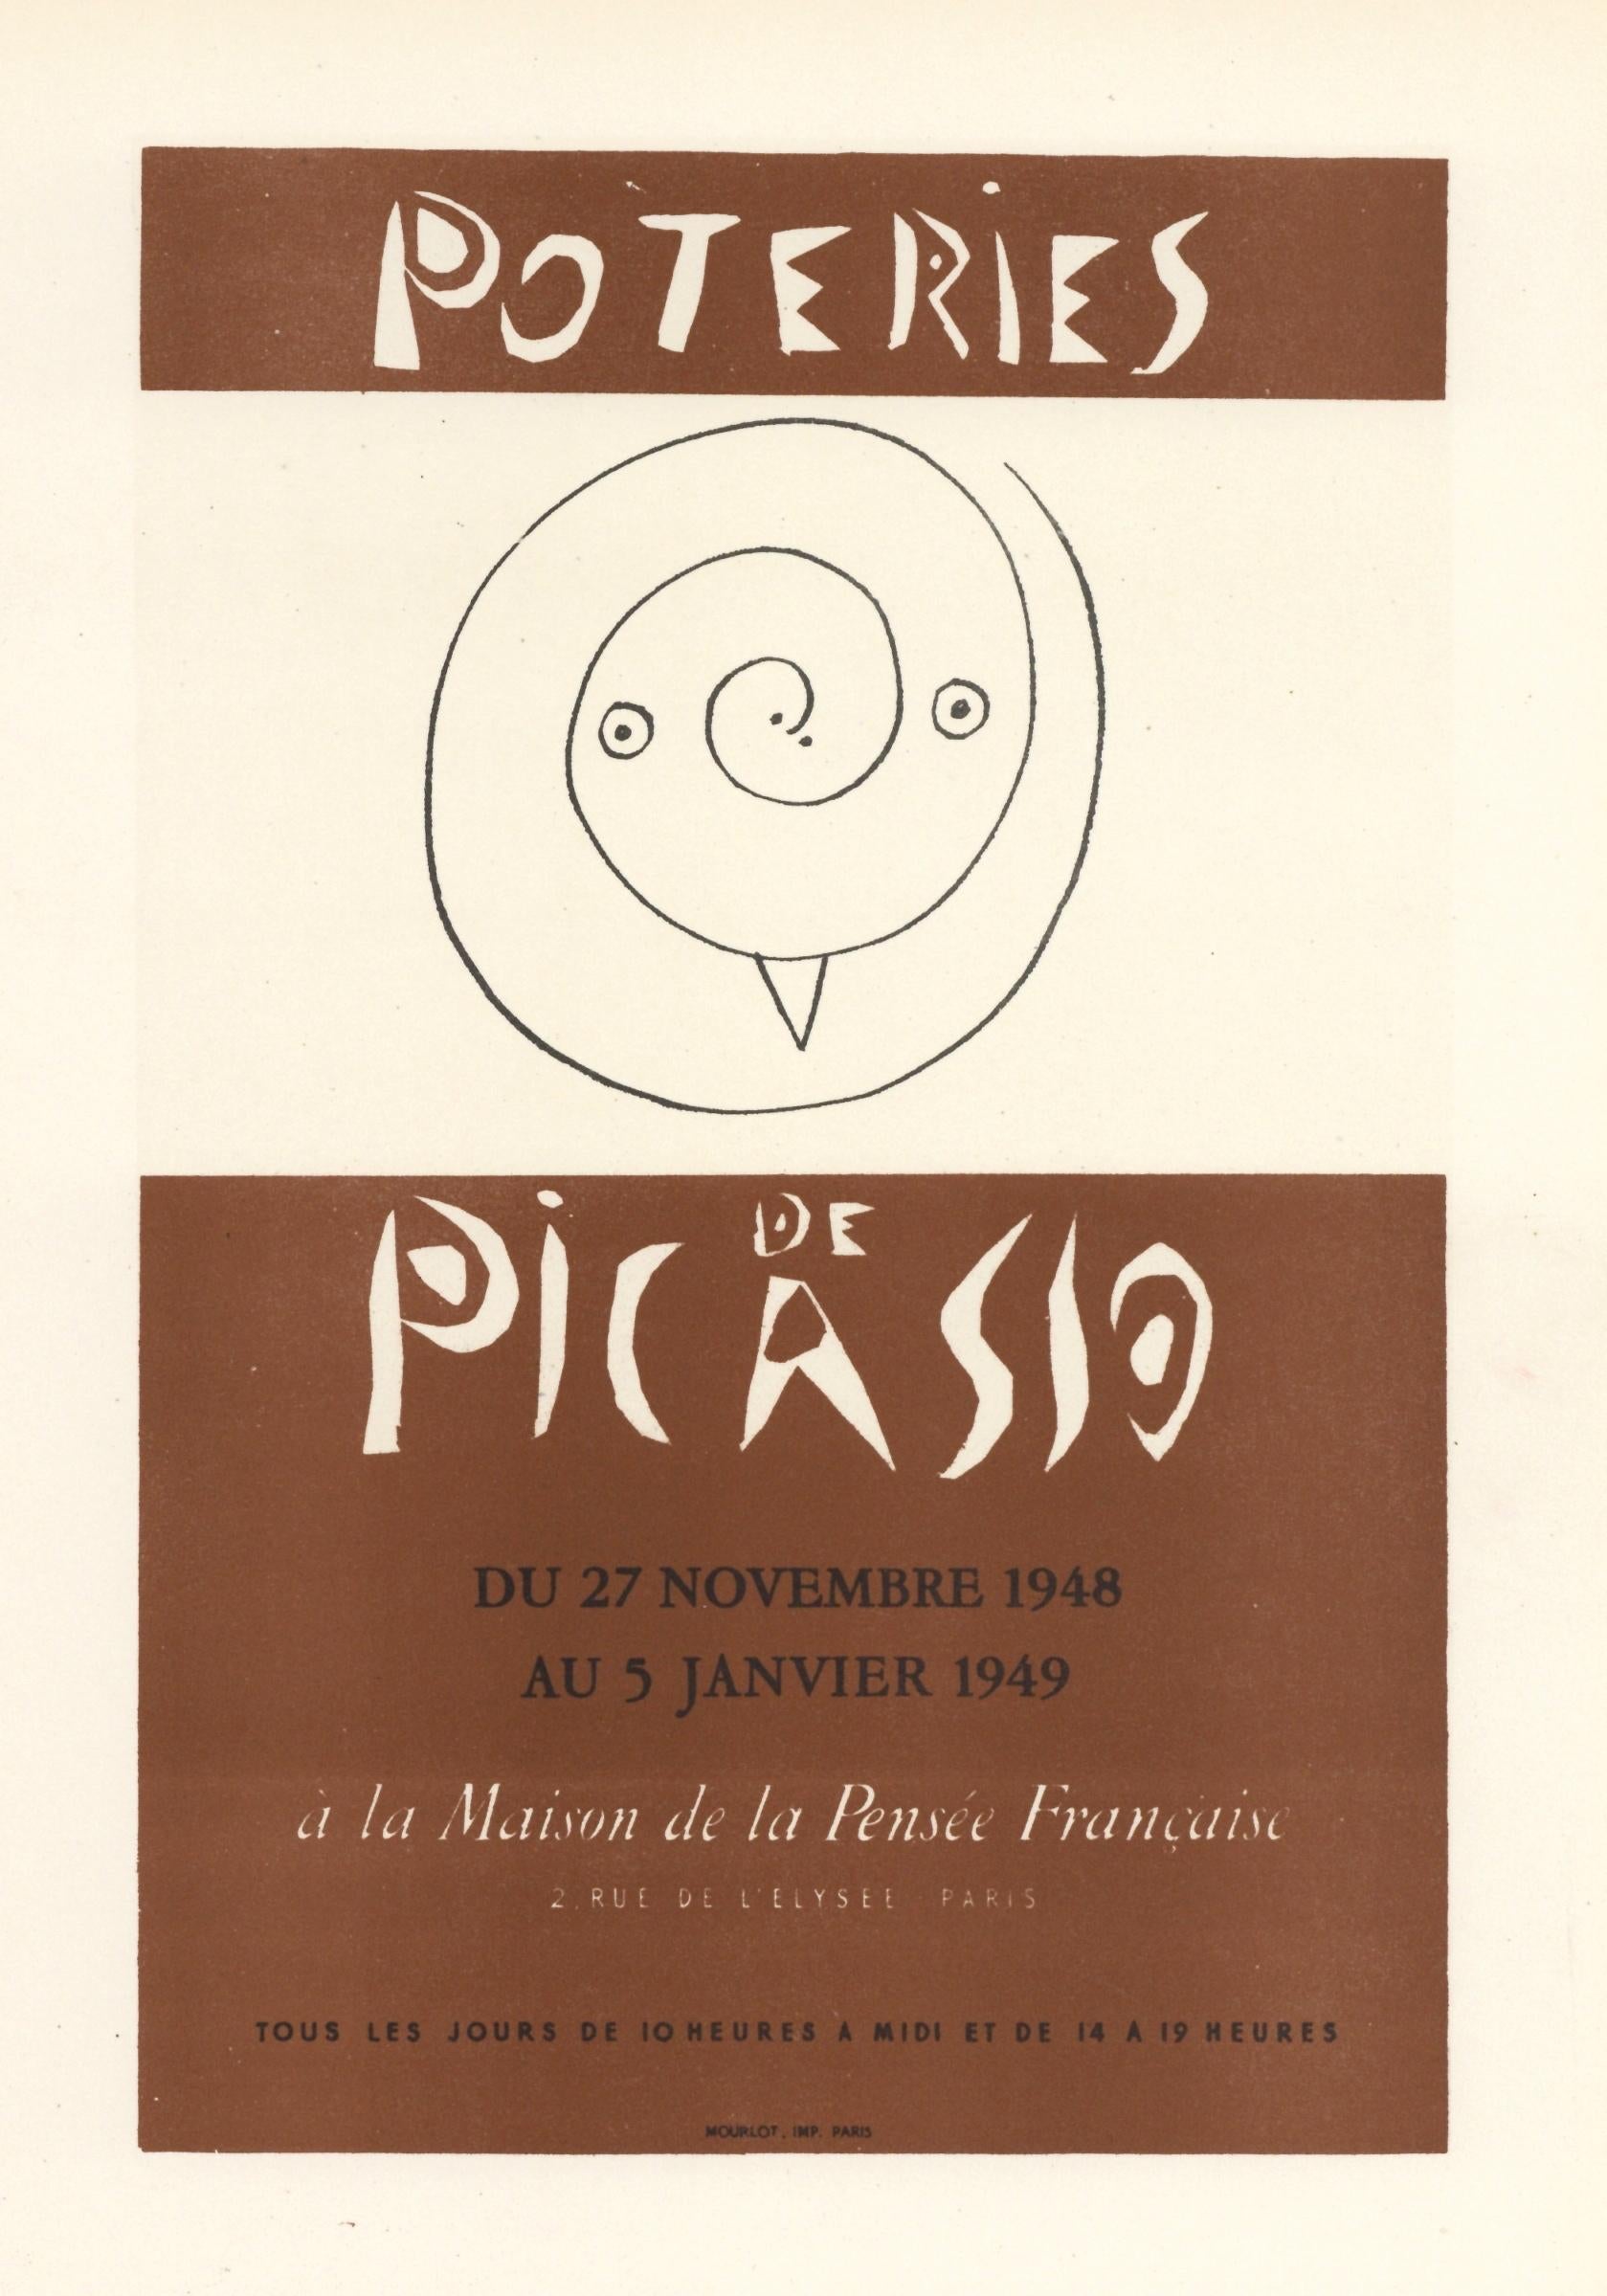 What is a Picasso etching?